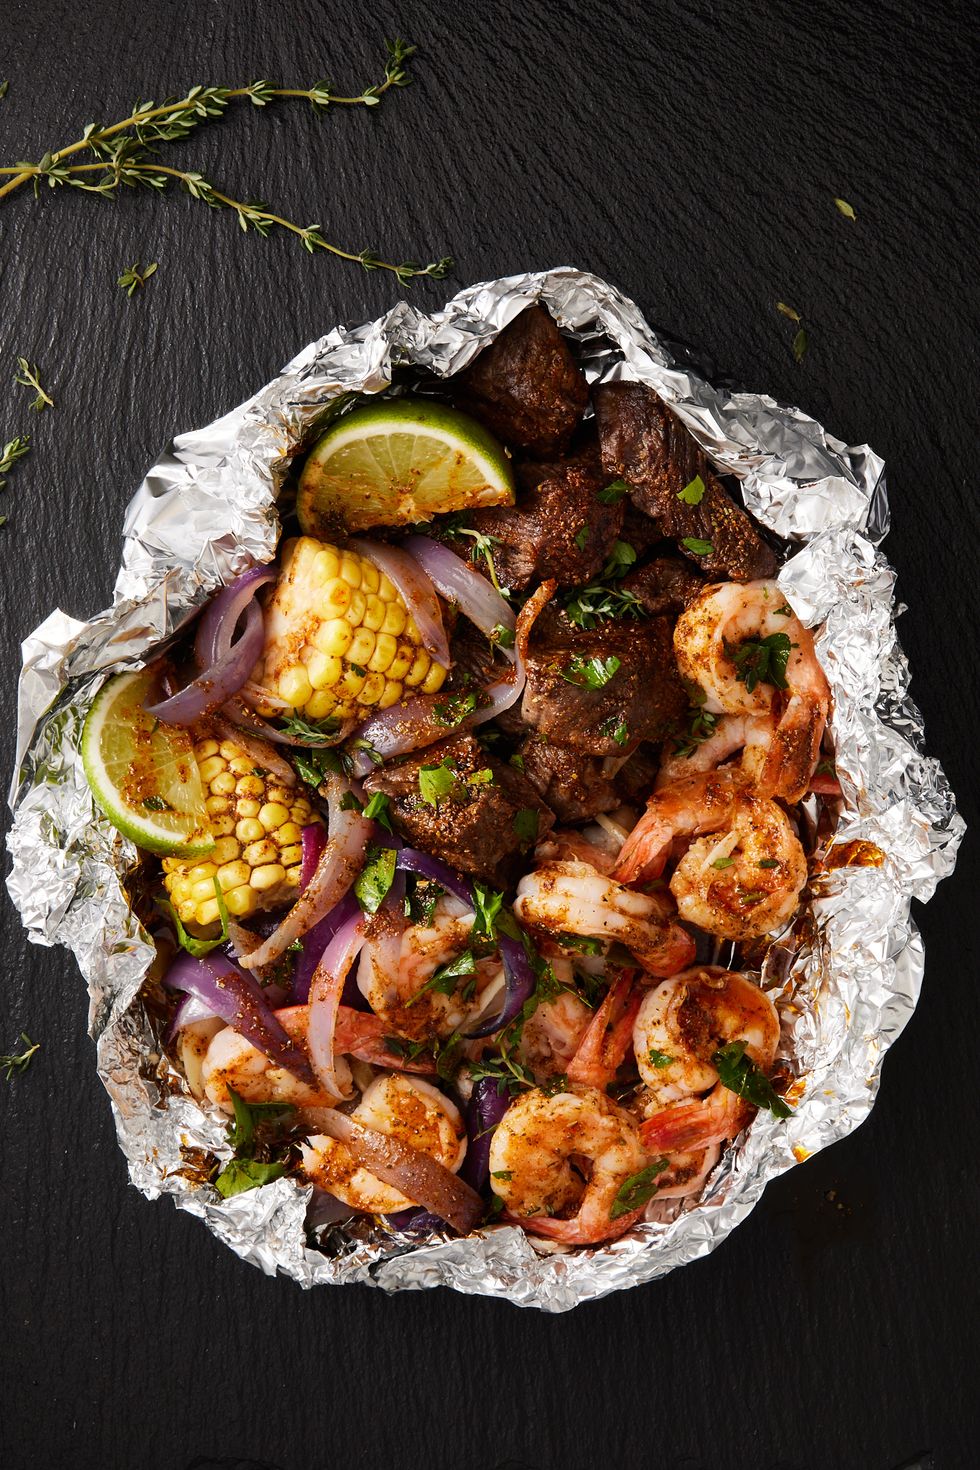 Grilling in Foil — The Easy Way to Grill, FN Dish - Behind-the-Scenes,  Food Trends, and Best Recipes : Food Network